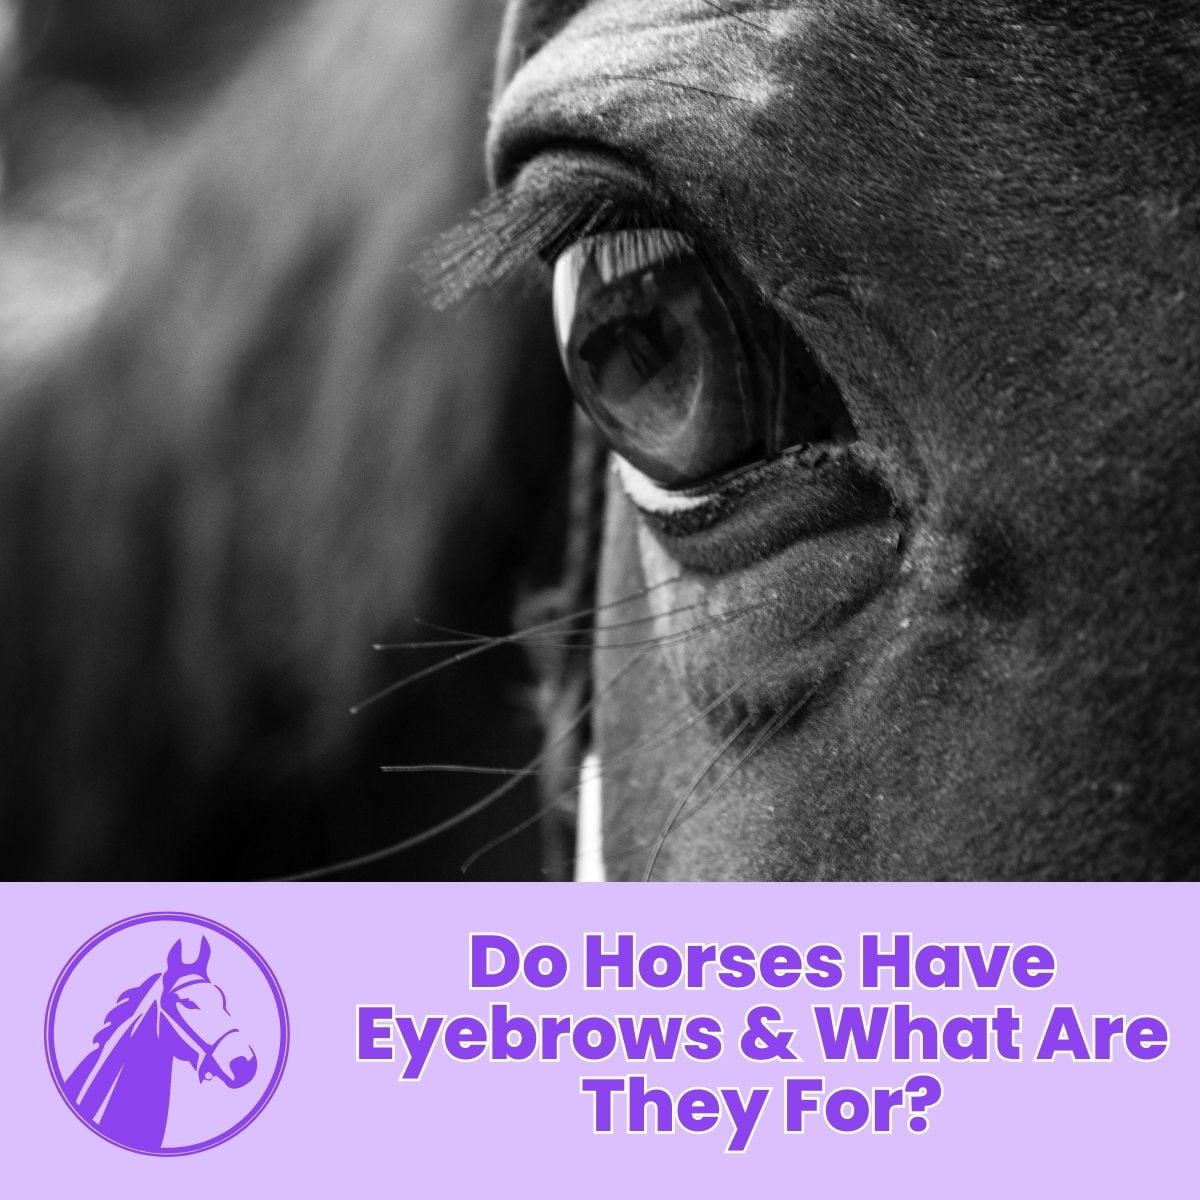 You are currently viewing Do Horses Have Eyebrows & What Are They For?